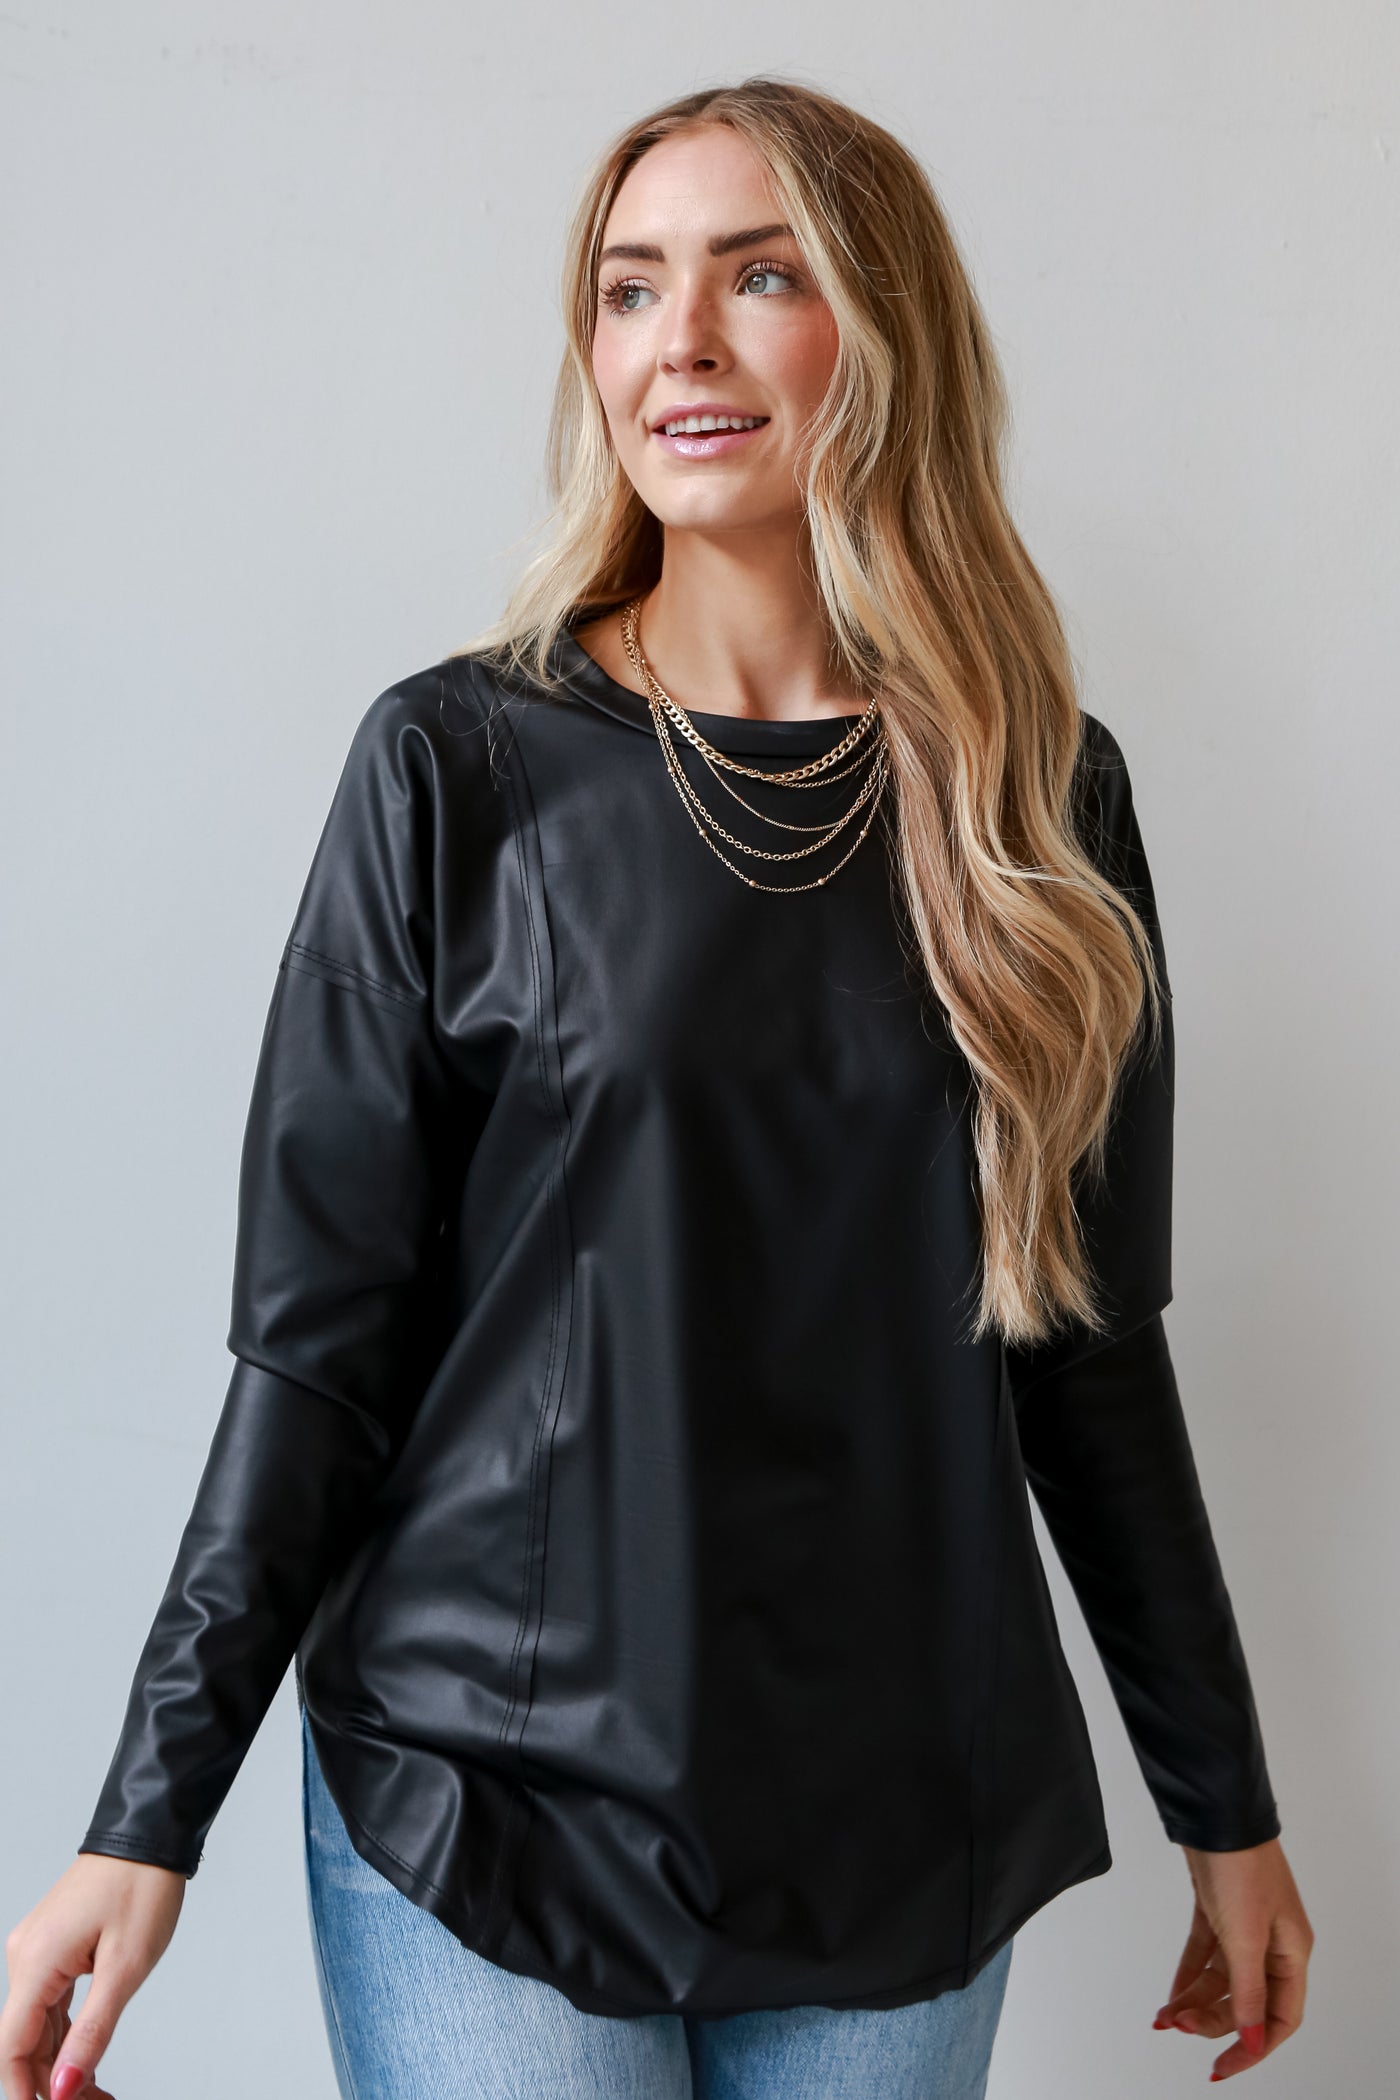 chic Black Leather Top